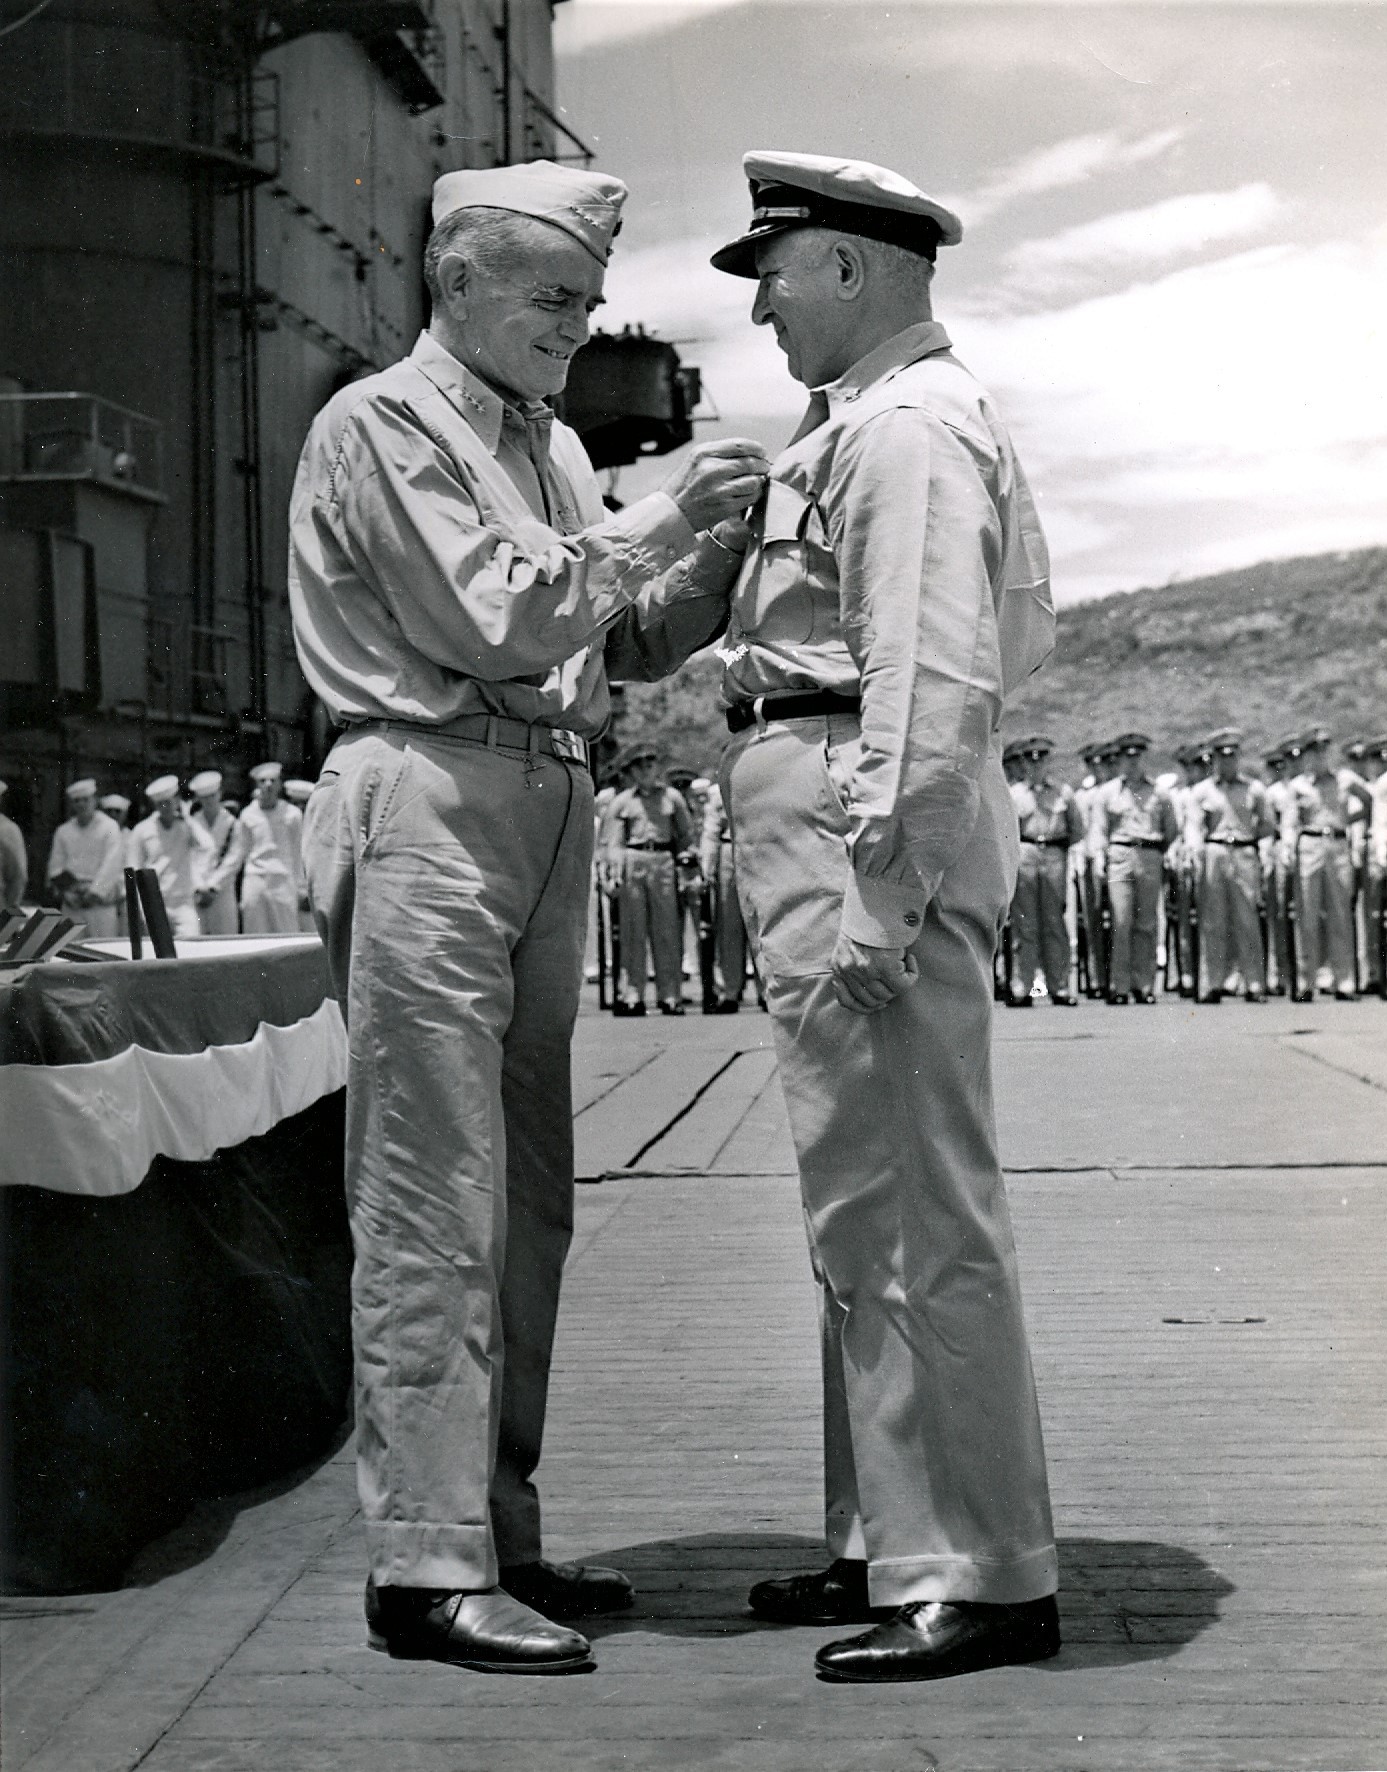 Admiral William Halsey presenting an award to a United States Navy Captain on the flight deck of USS Saratoga in the South Pacific, circa 1942.